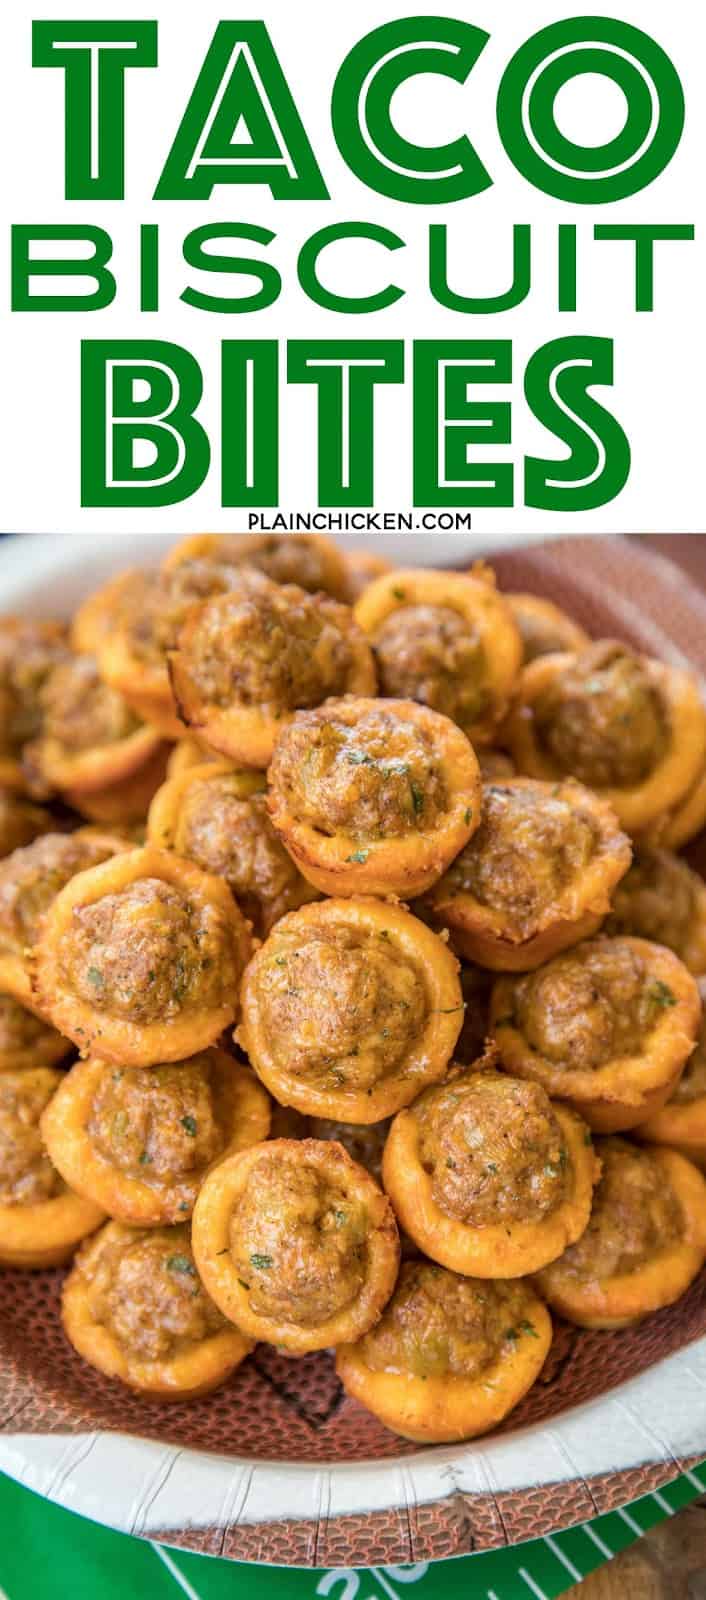 Taco Biscuit Bites Recipe - taco seasoned sausage, green chiles and cheese baked in mini biscuit cups! SERIOUSLY delicious! Great for parties and tailgates!!! Can make ahead for easy entertaining. Only 5 ingredients and ready to eat in 15 minutes! Dip in salsa and/or ranch. These things FLY off the plate!